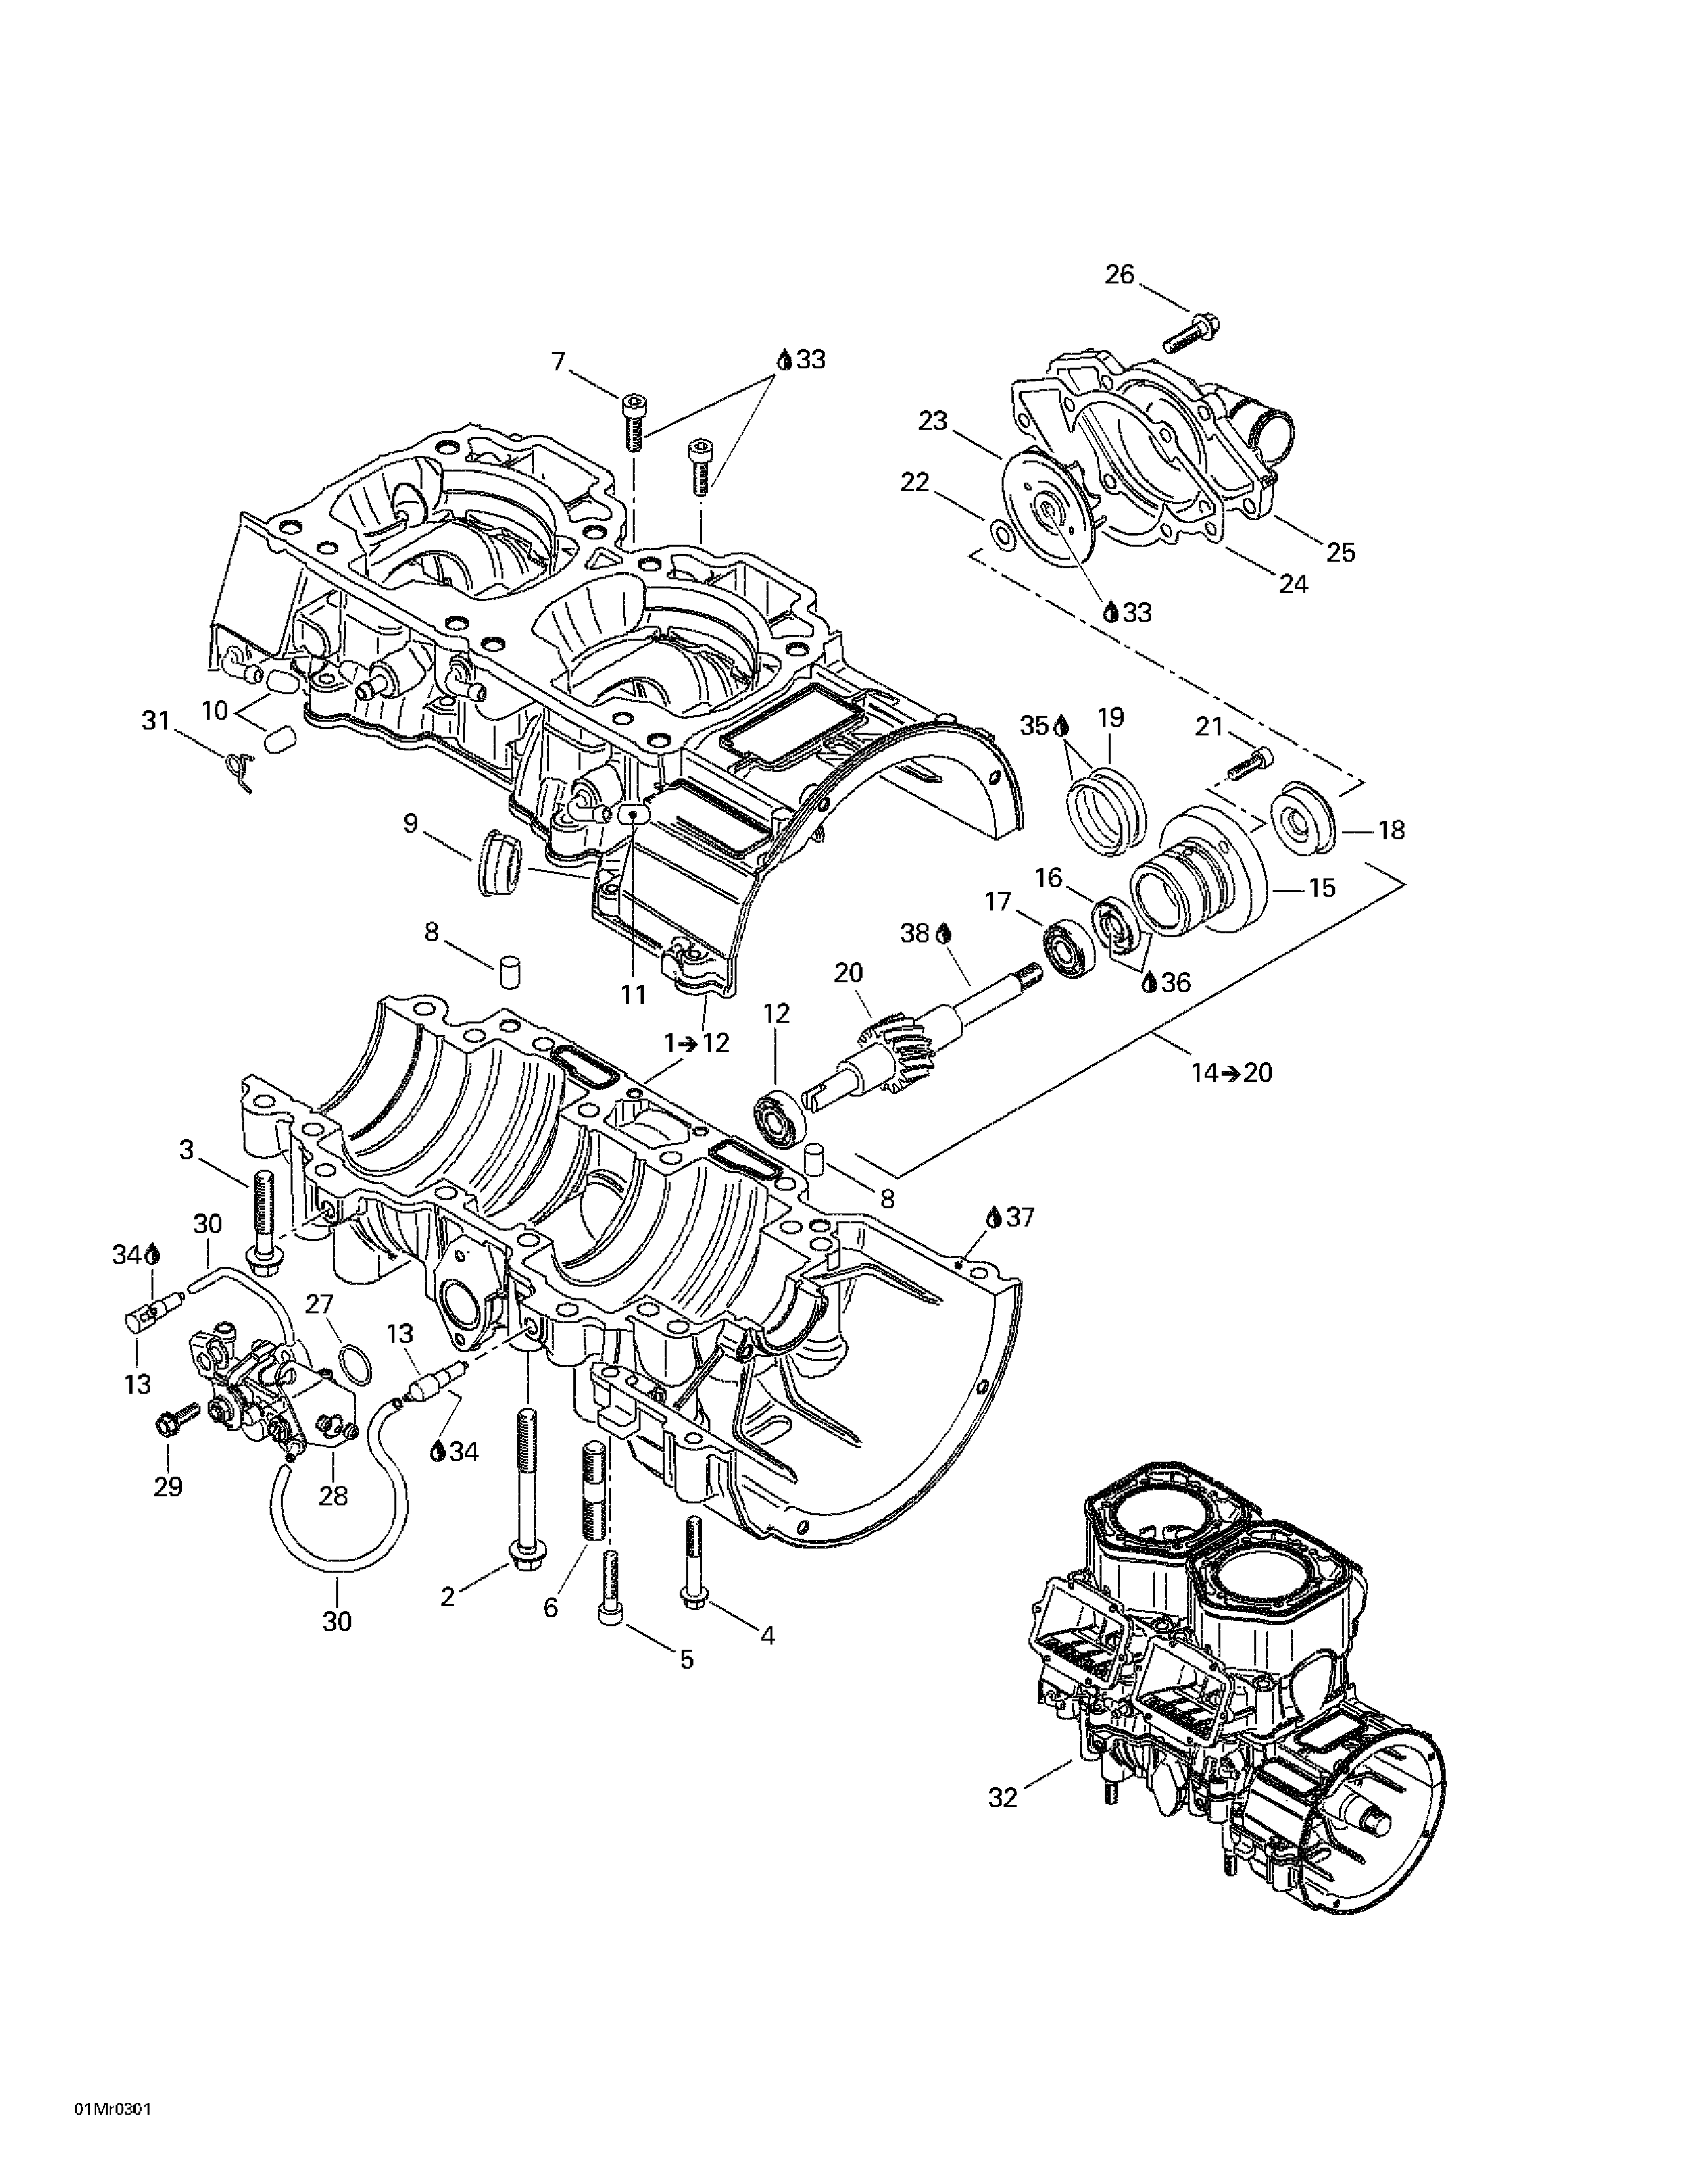 Crankcase, water pump and oil pump